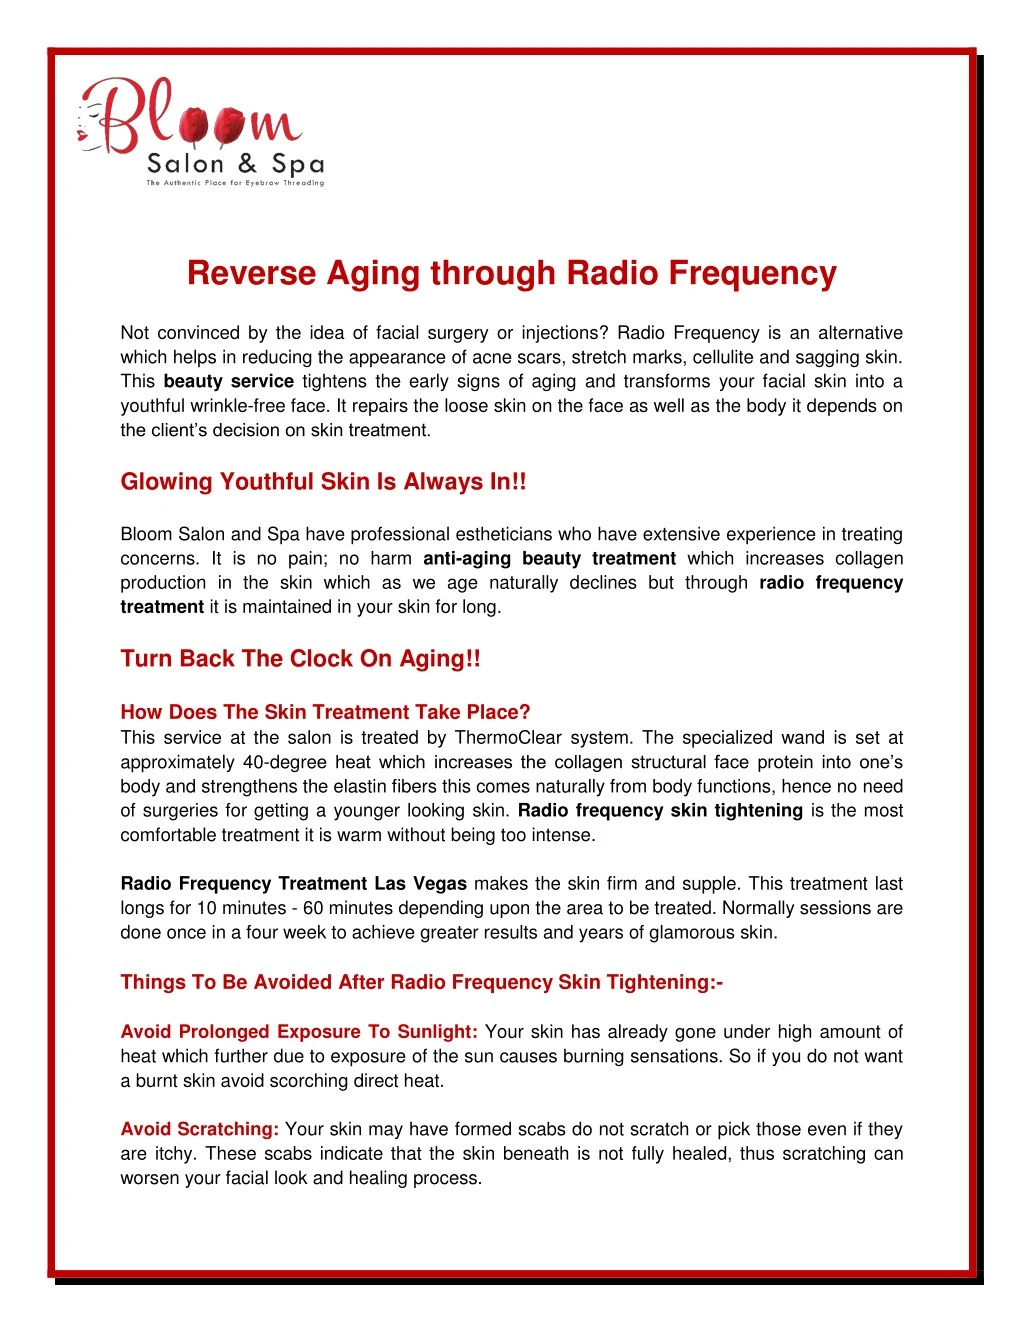 reverse aging through radio frequency